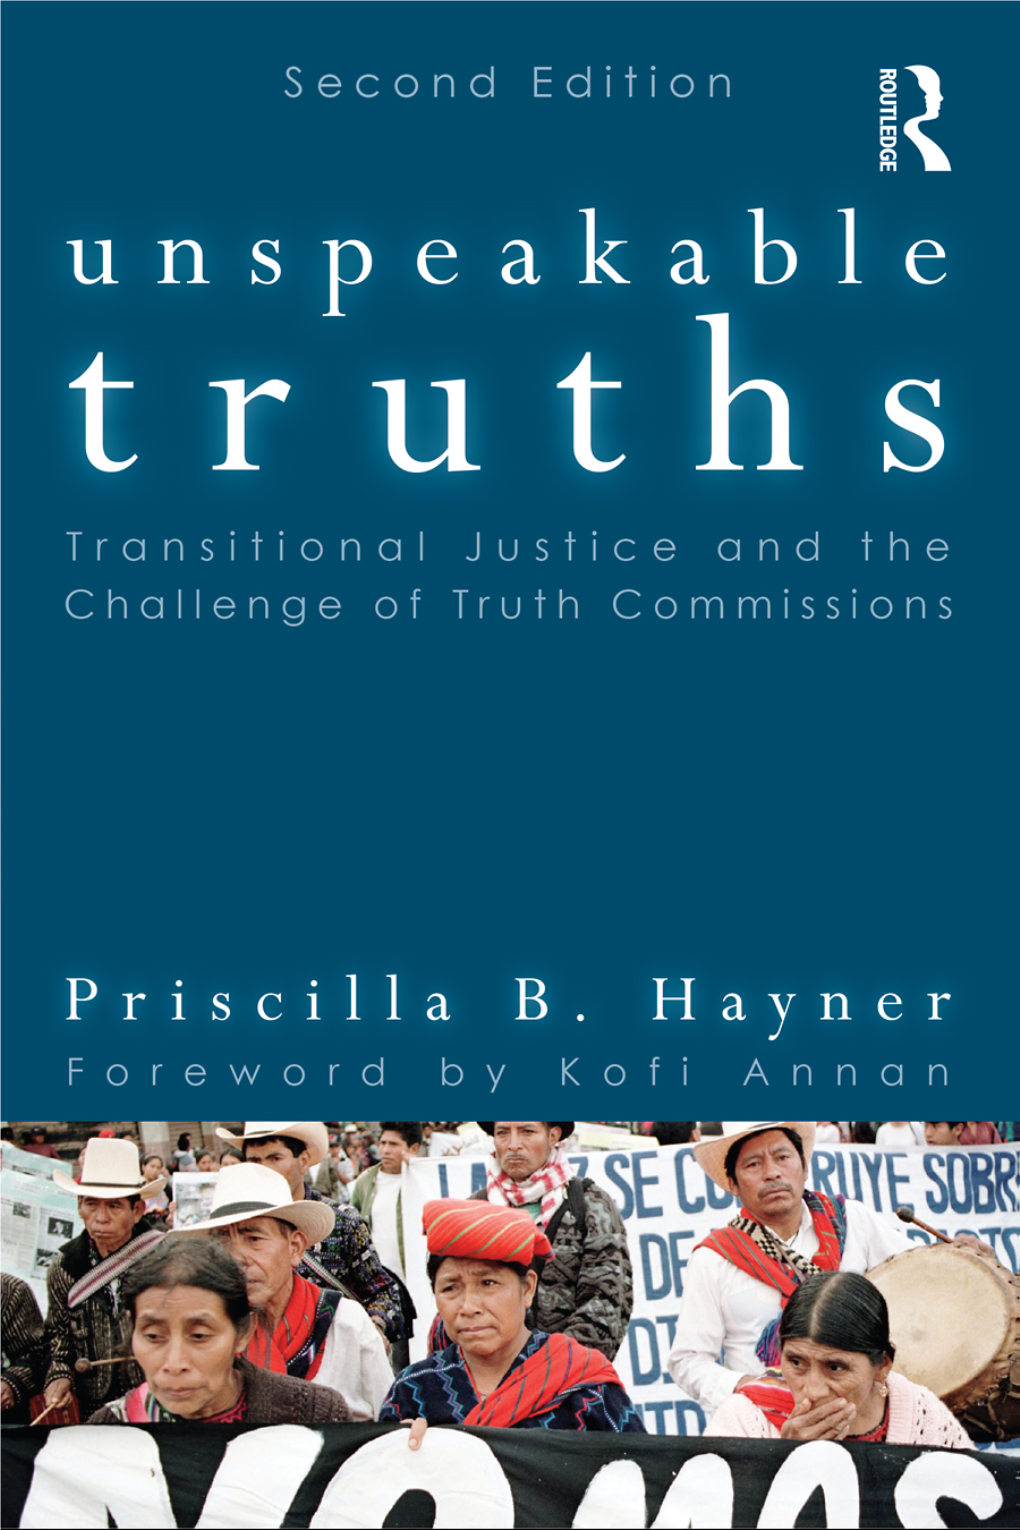 Unspeakable Truths: Transitional Justice and the Challenge of Truth